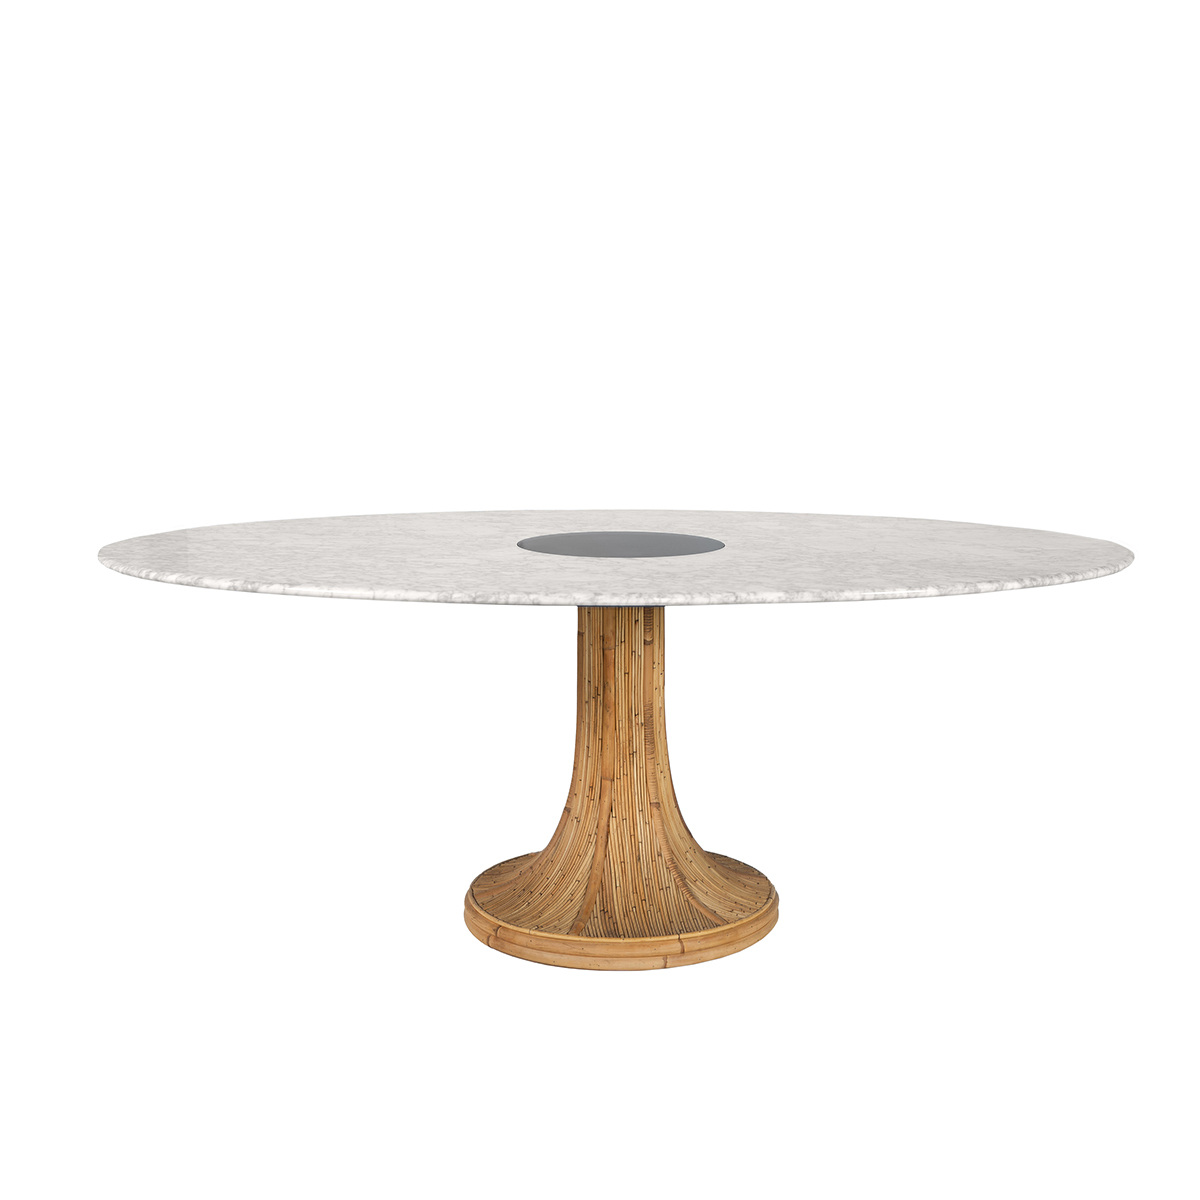 Oval Dining Table Riviera, White / Natural - ⌀199 x H74 cm - Carrara marble / Rattan - image 2